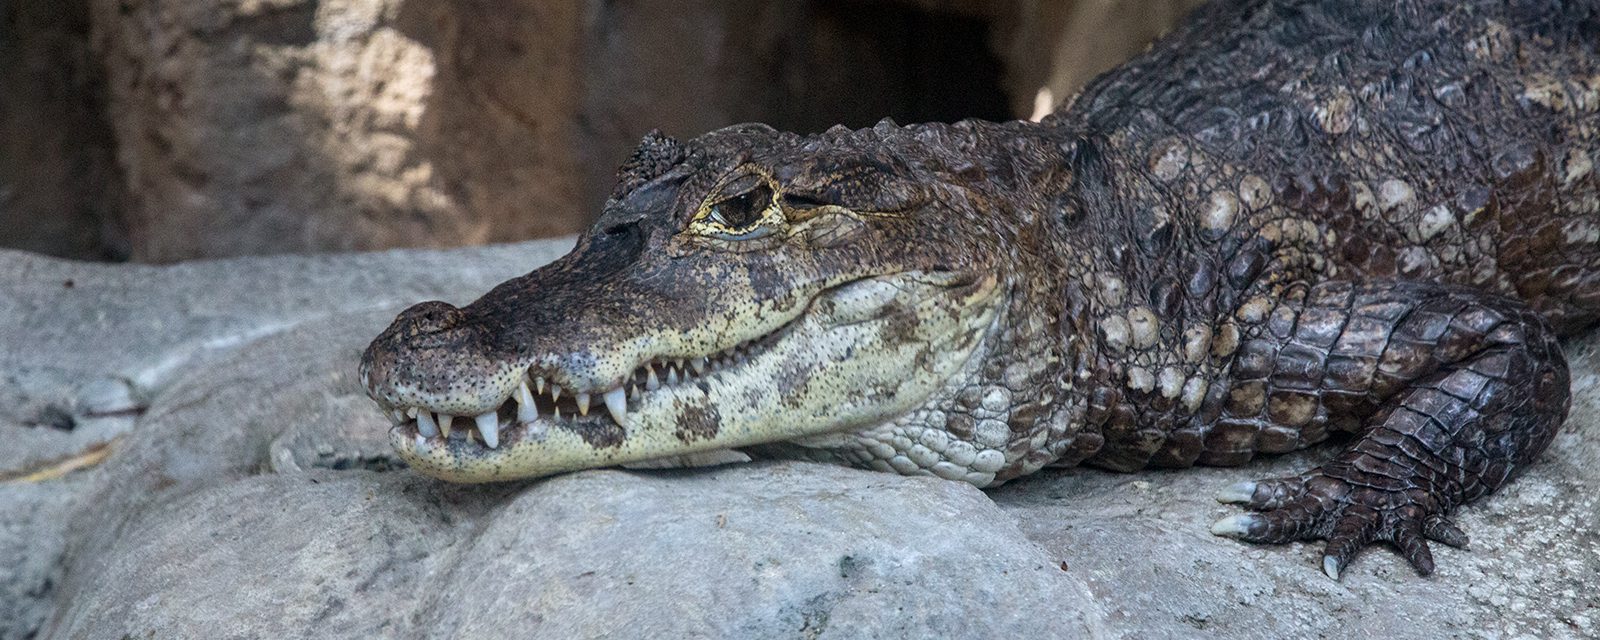 Spectacled caiman in exhibit